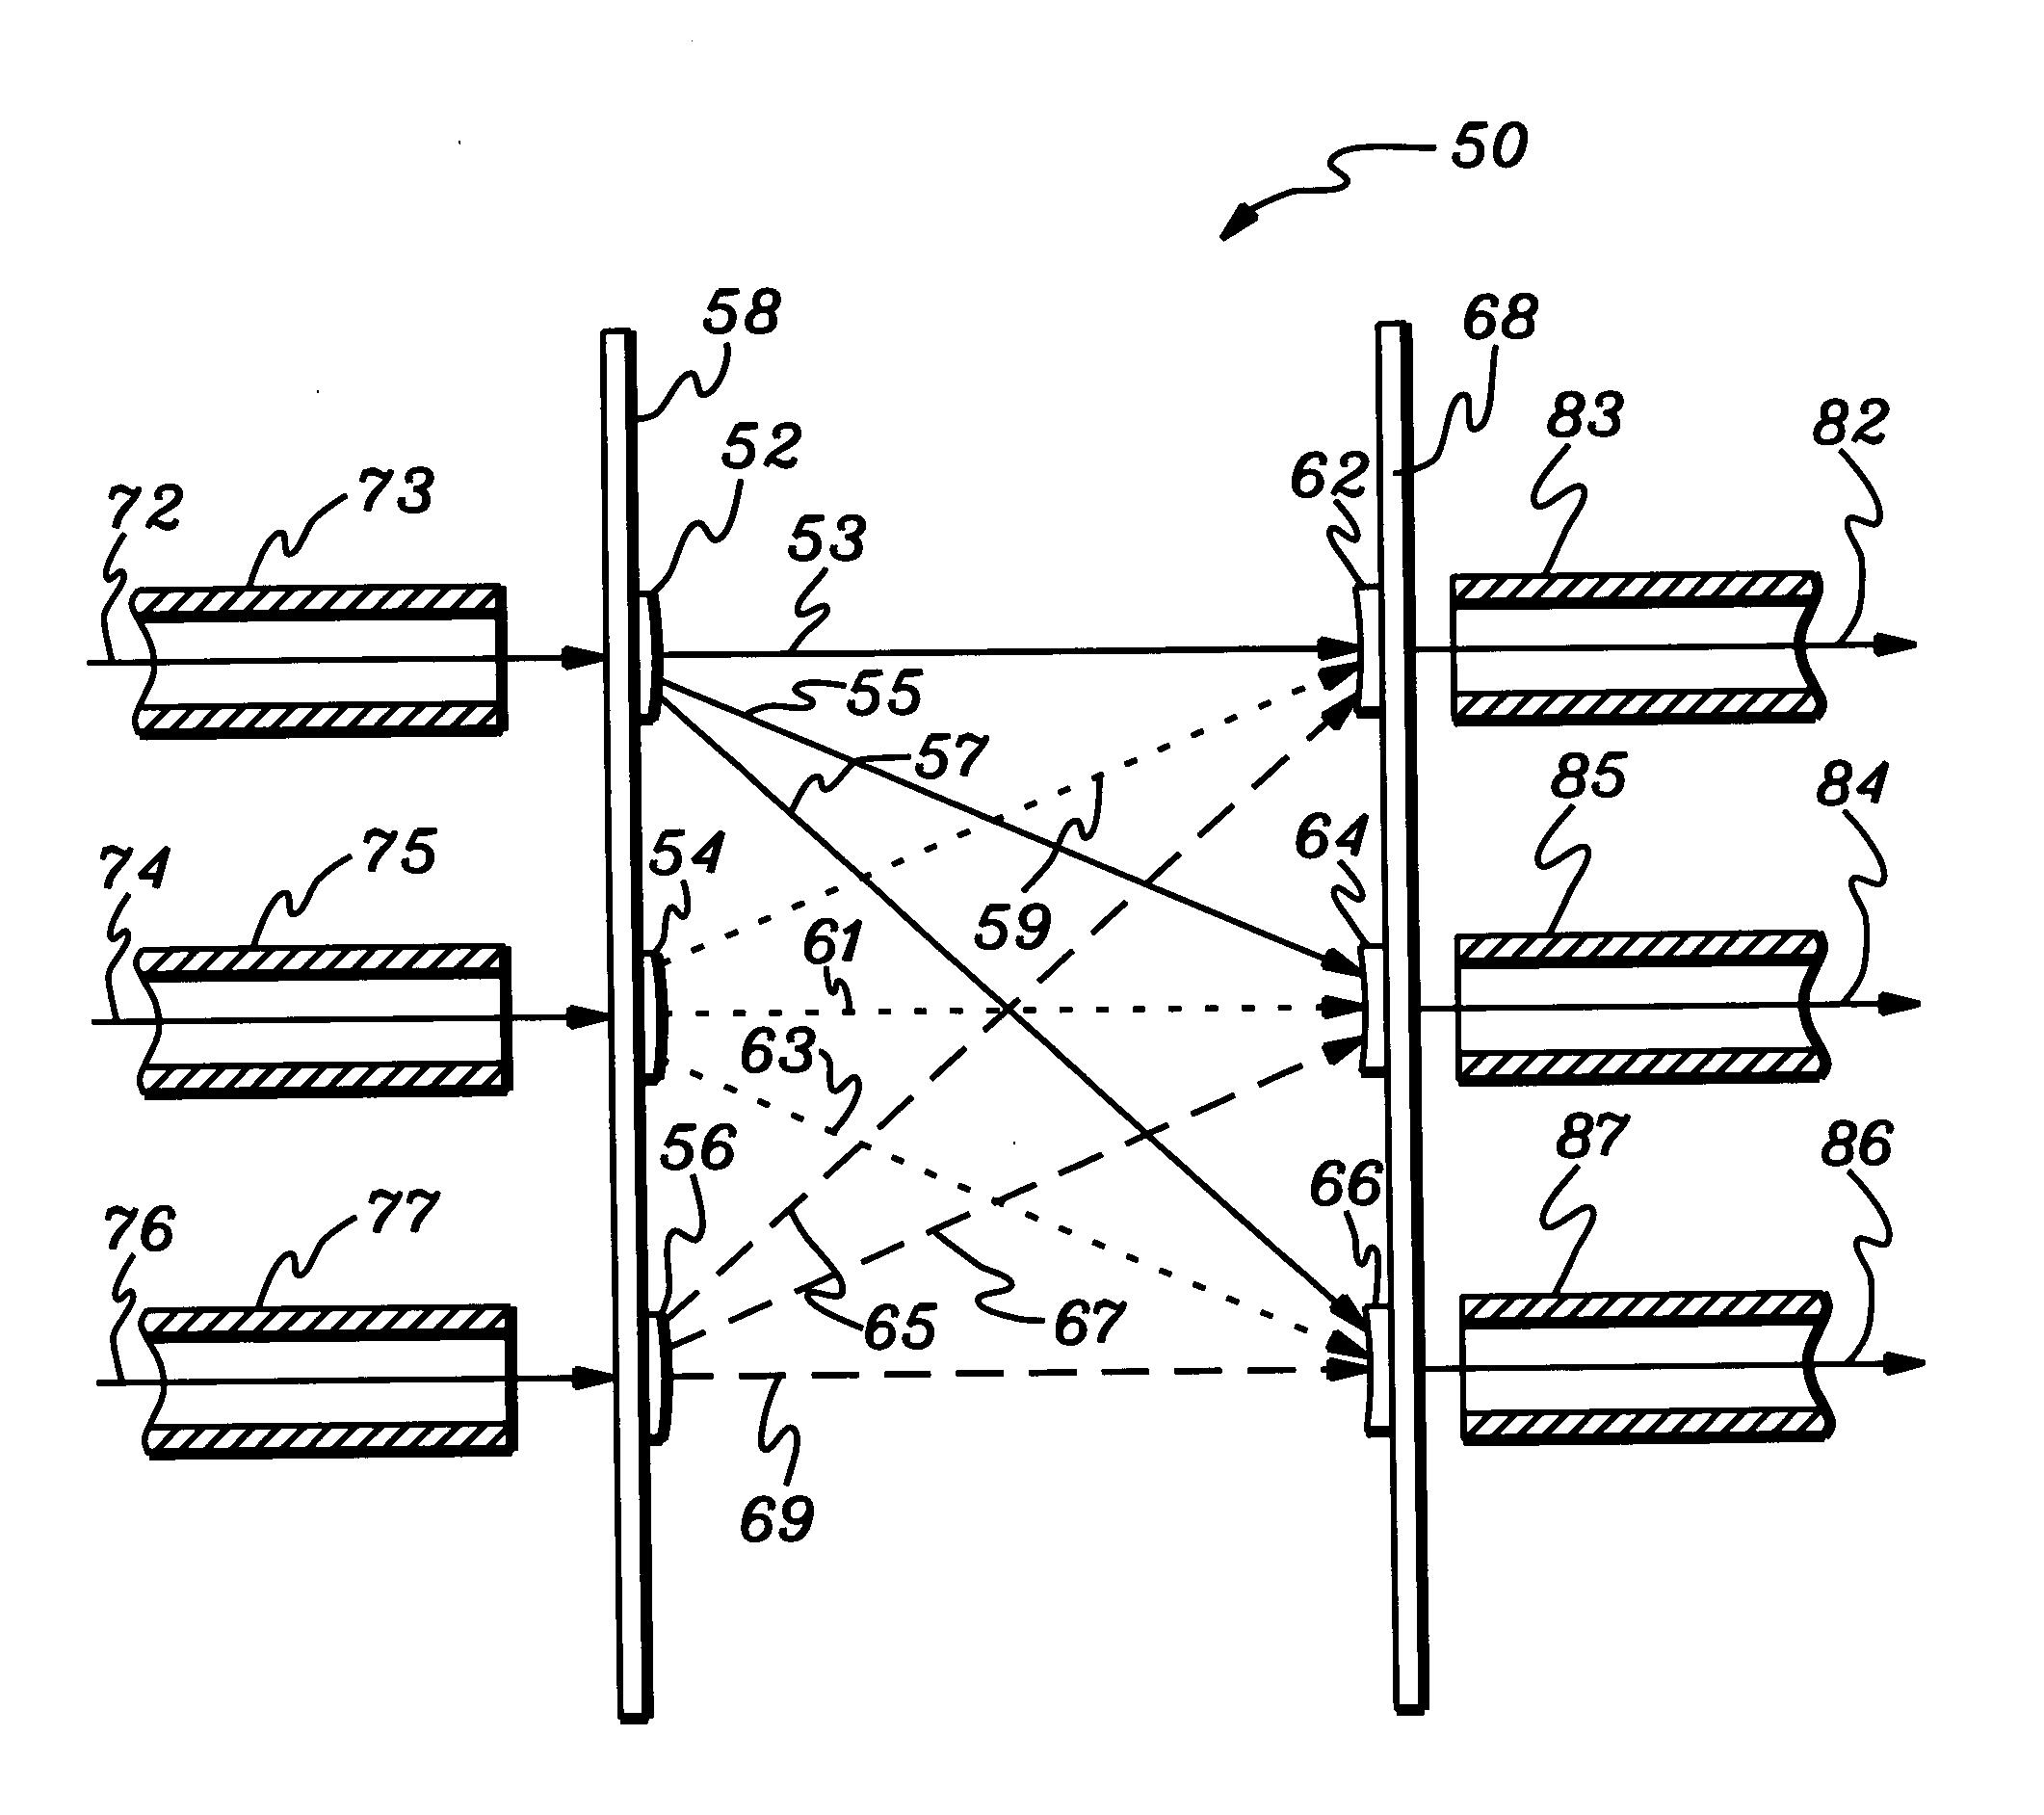 Methods and devices for coupling electromagnetic radiation using diffractive optical elements